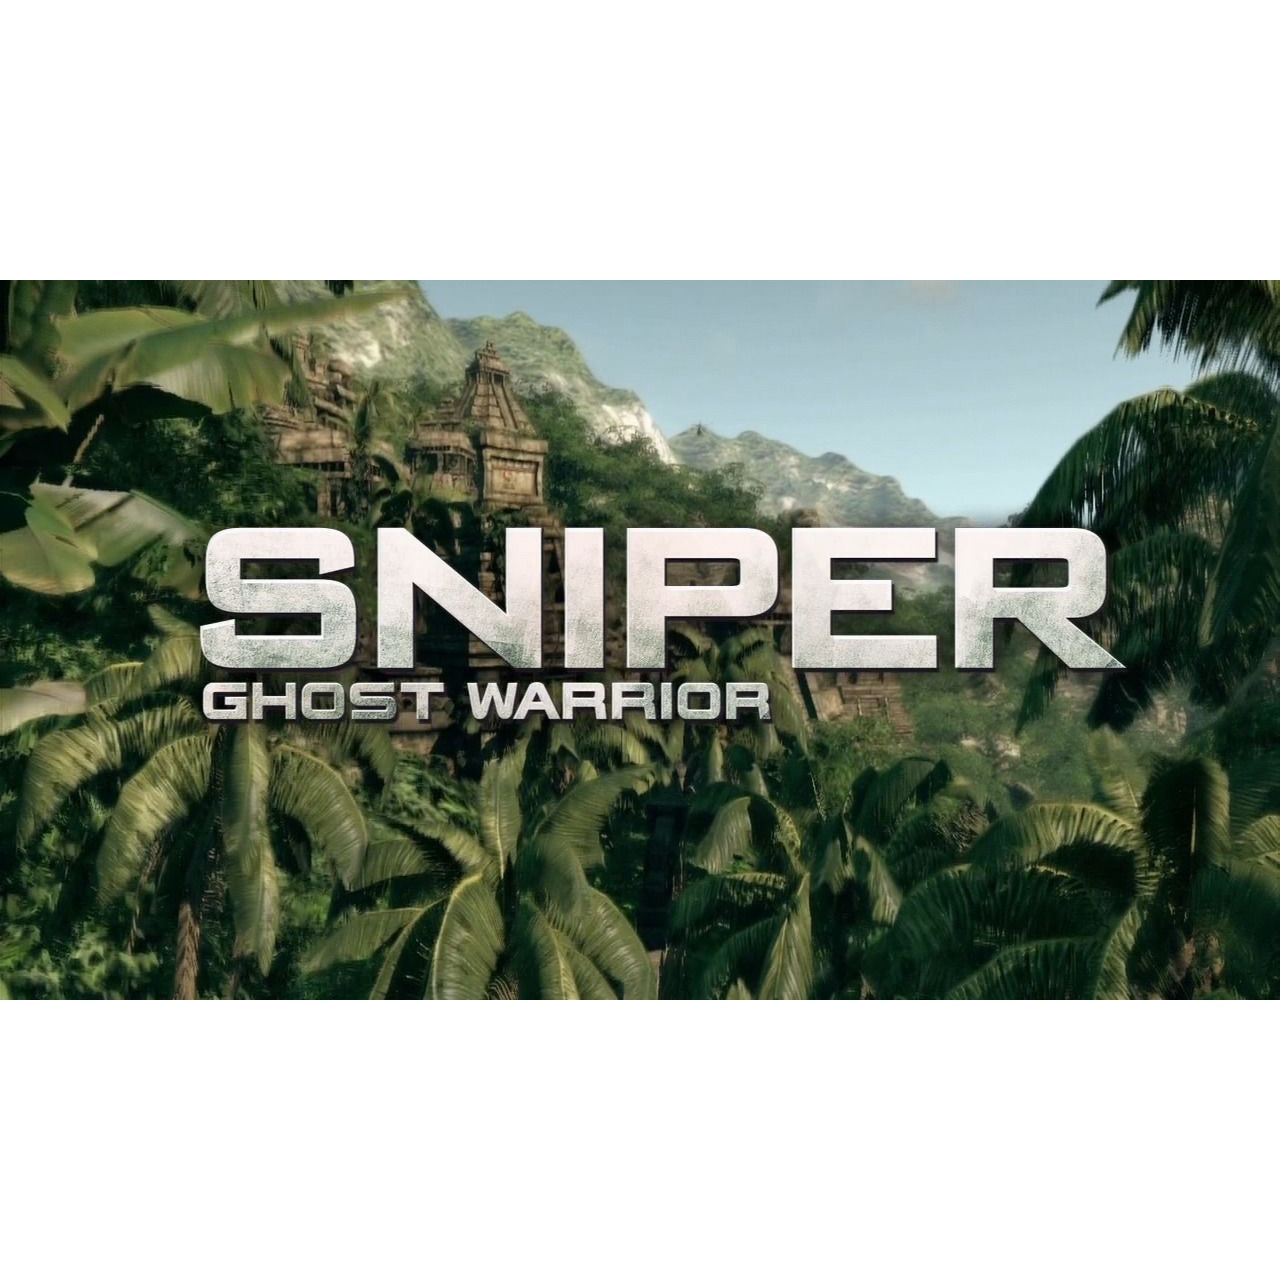 Sniper: Ghost Warrior - PlayStation 3 (PS3) Game - YourGamingShop.com - Buy, Sell, Trade Video Games Online. 120 Day Warranty. Satisfaction Guaranteed.